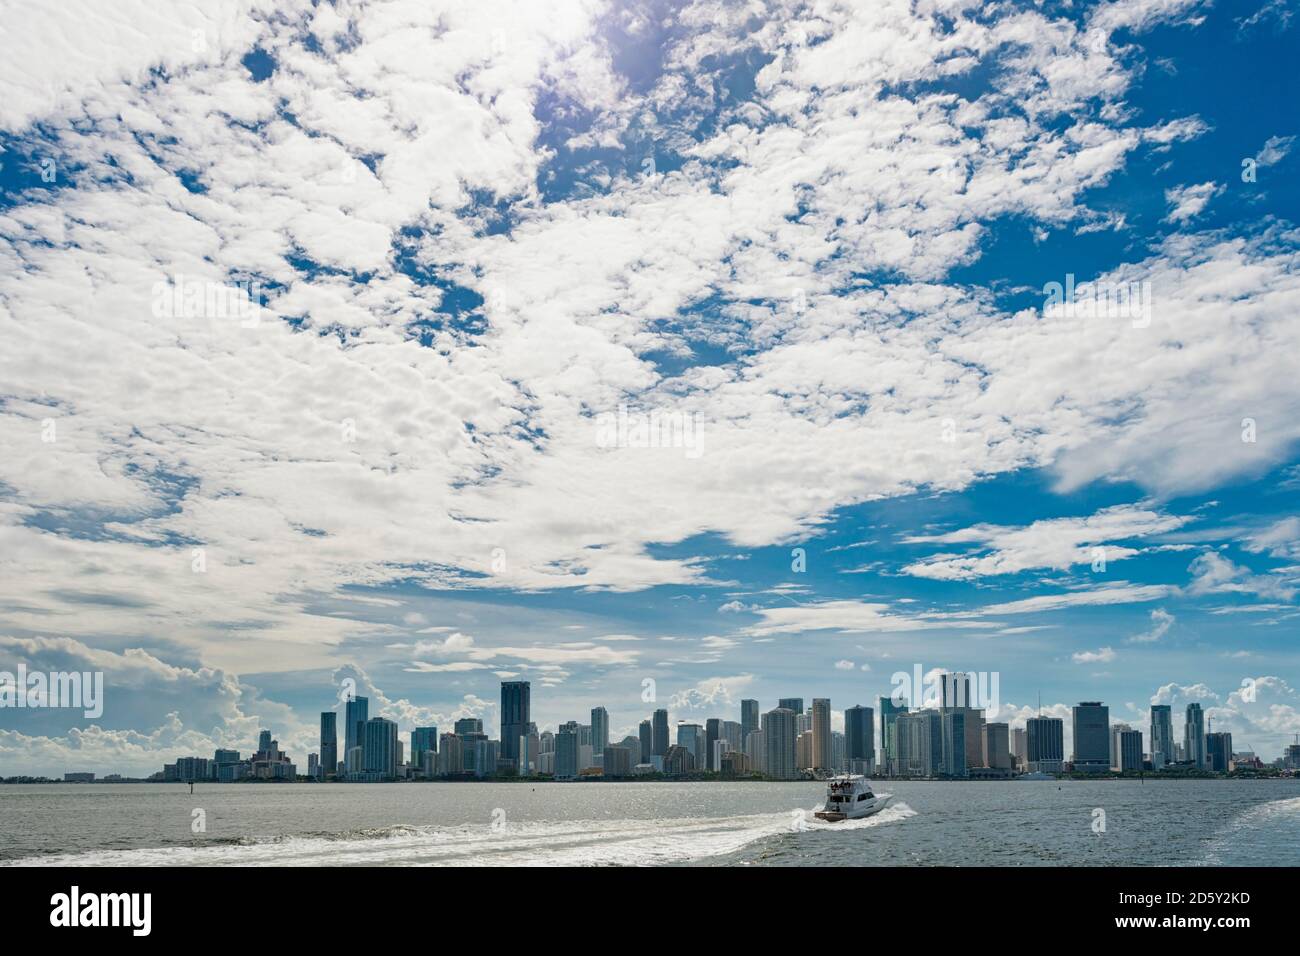 USA, Florida, Miami, Downtown, skyline with high-rises and motorboat Stock Photo